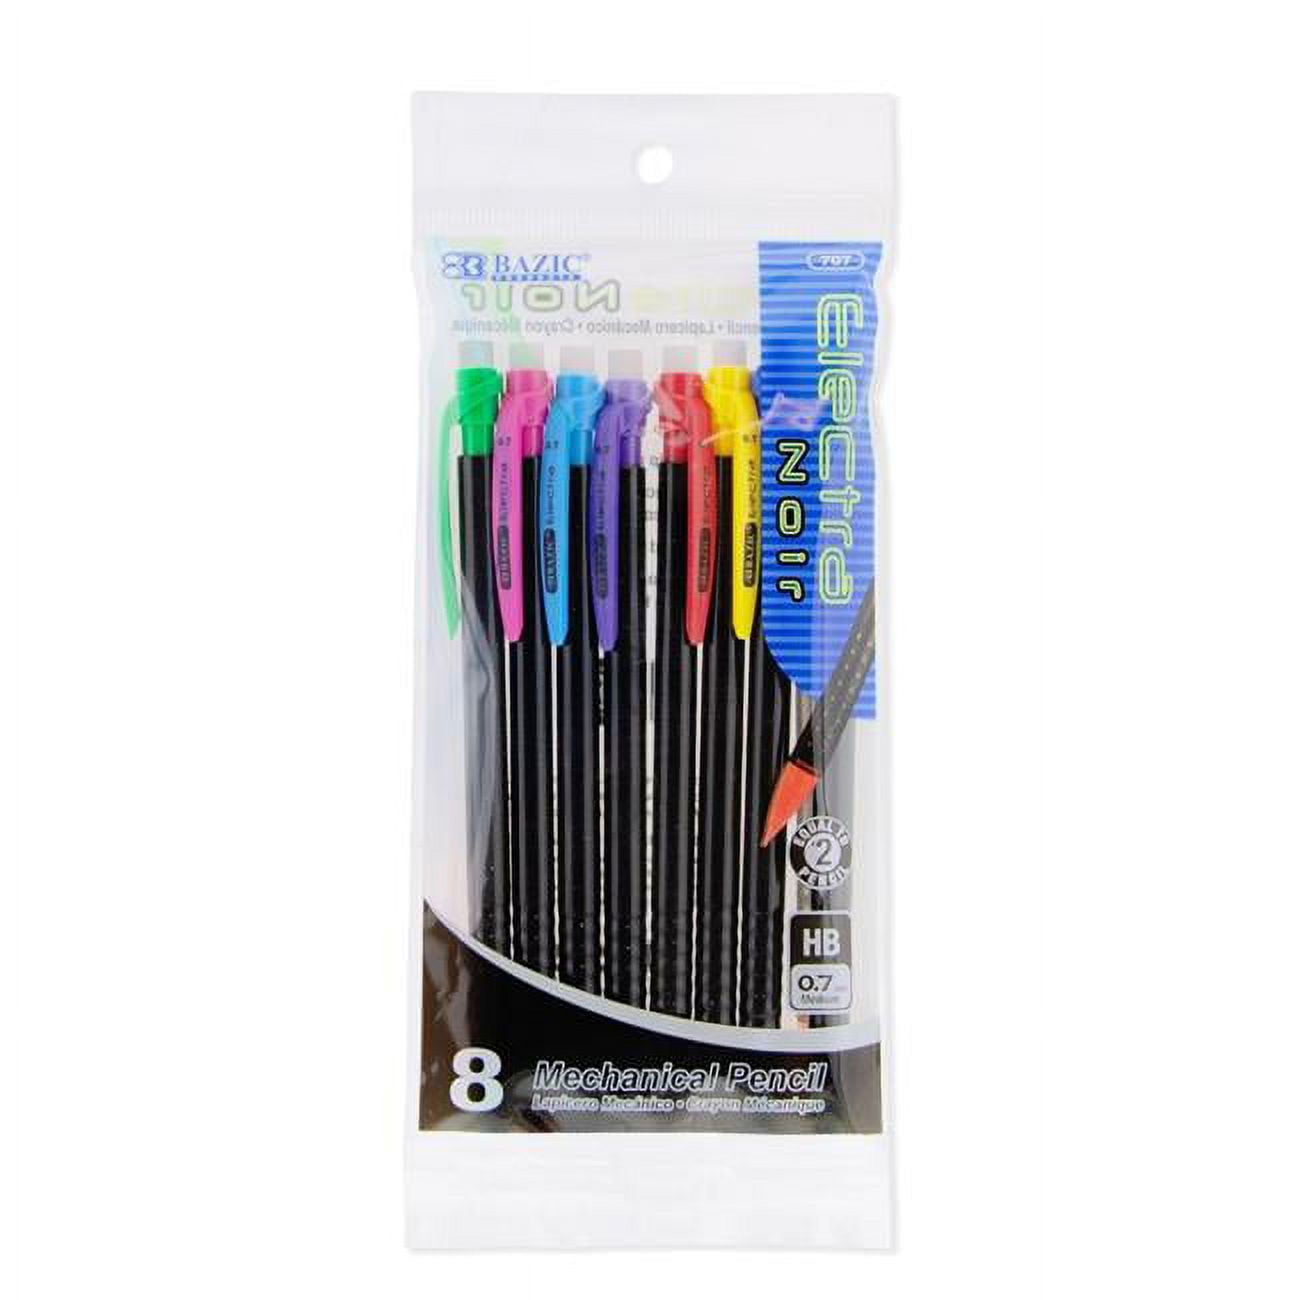 Electra Noir 0.7 Mm Mechanical Pencil, Pack Of 8 - Case Of 24